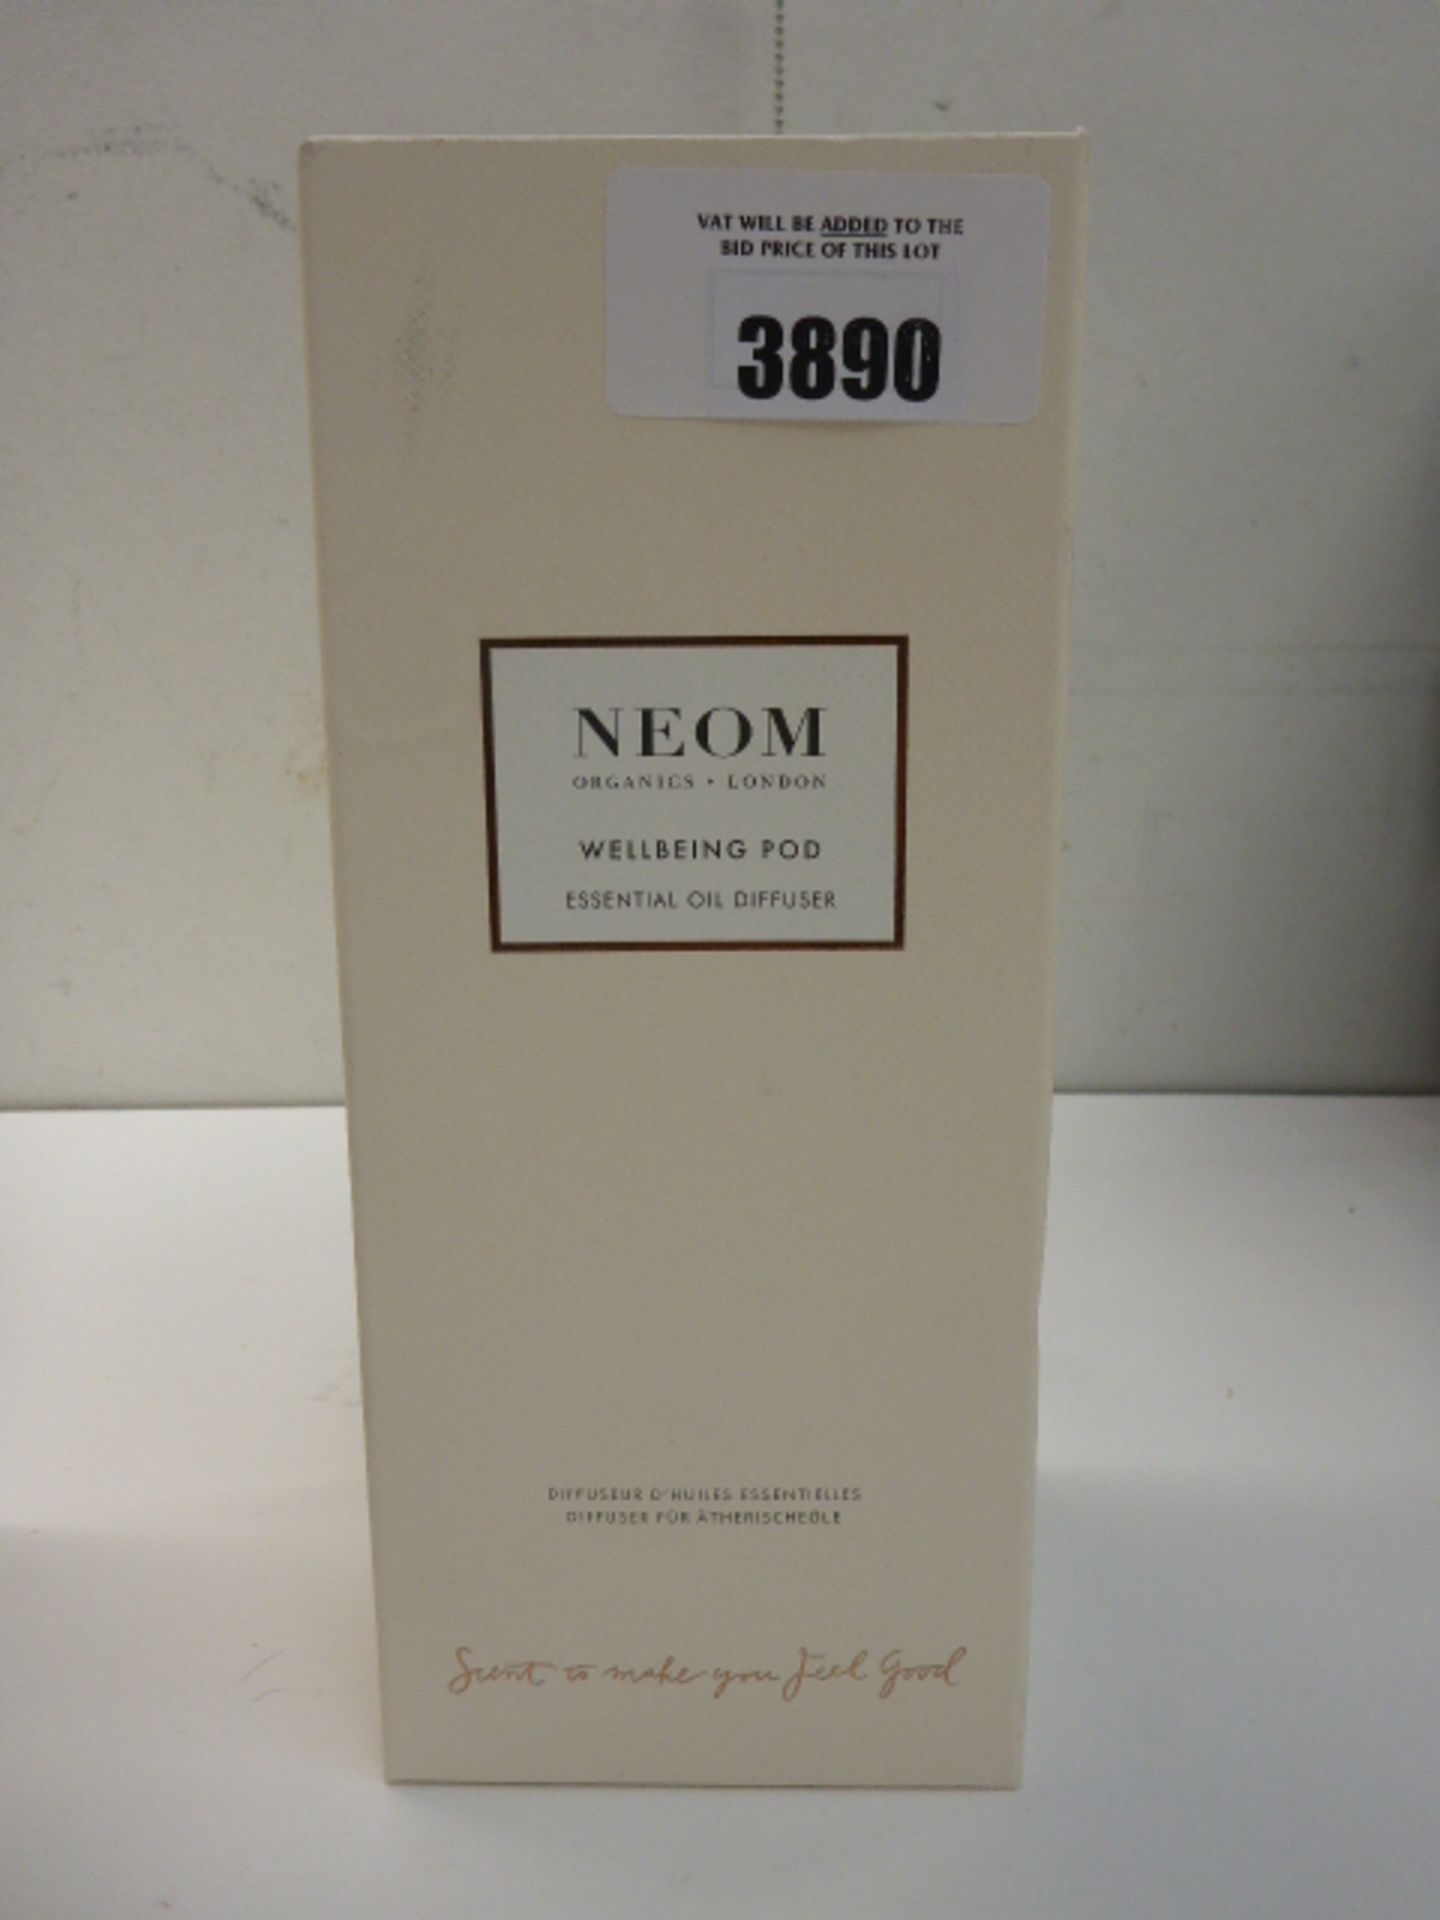 Neom Wellbeing Pod essential oil diffuser